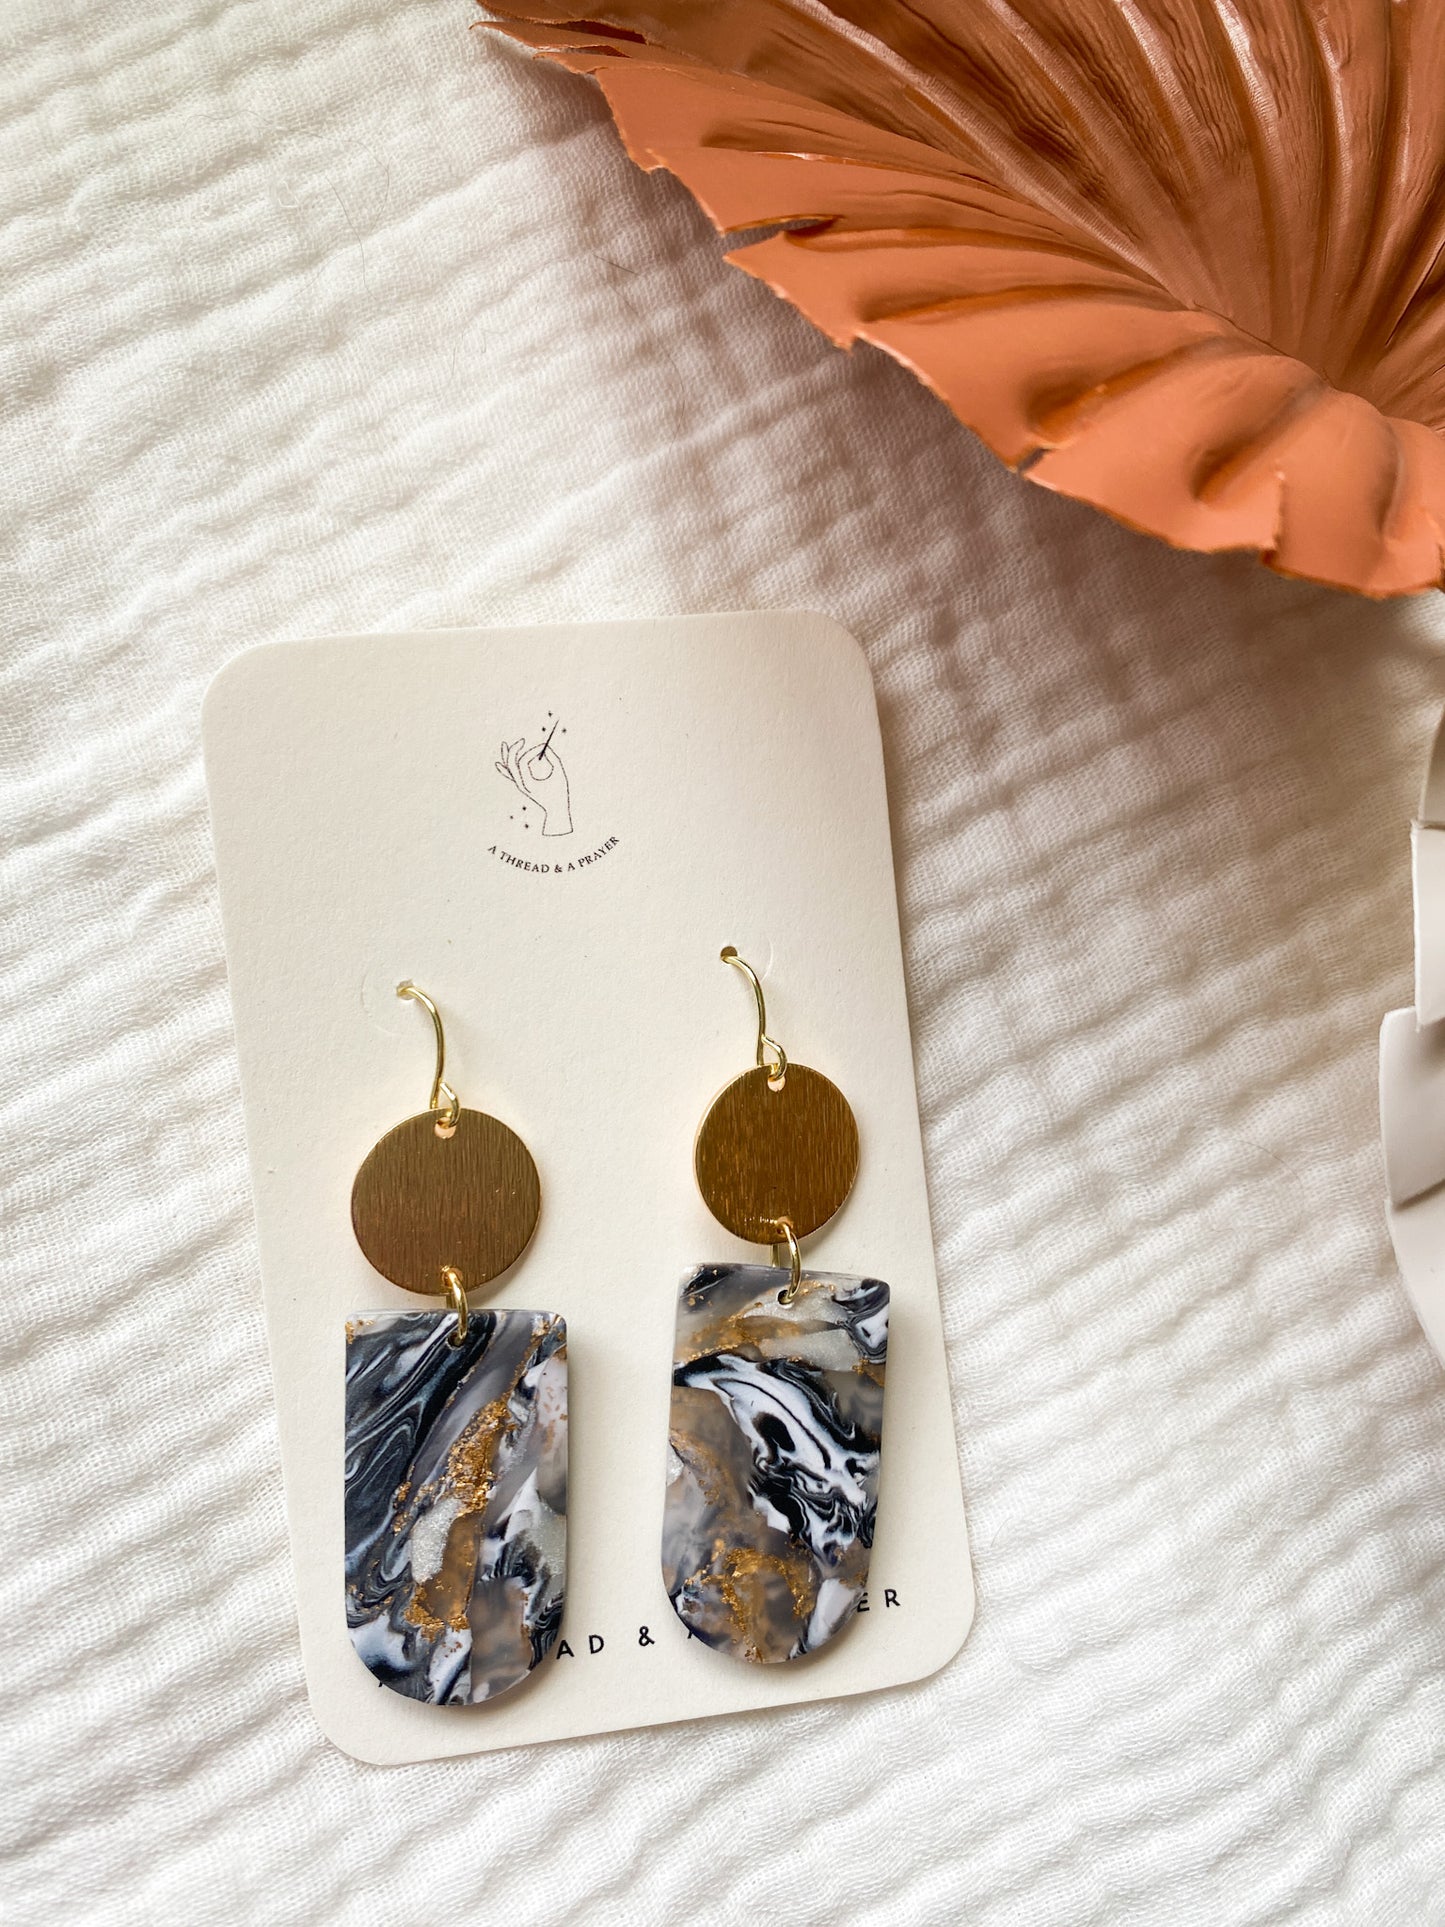 Black and Gold Marbled Earrings | Polymer Clay and Metal Accent | Lightweight Earrings